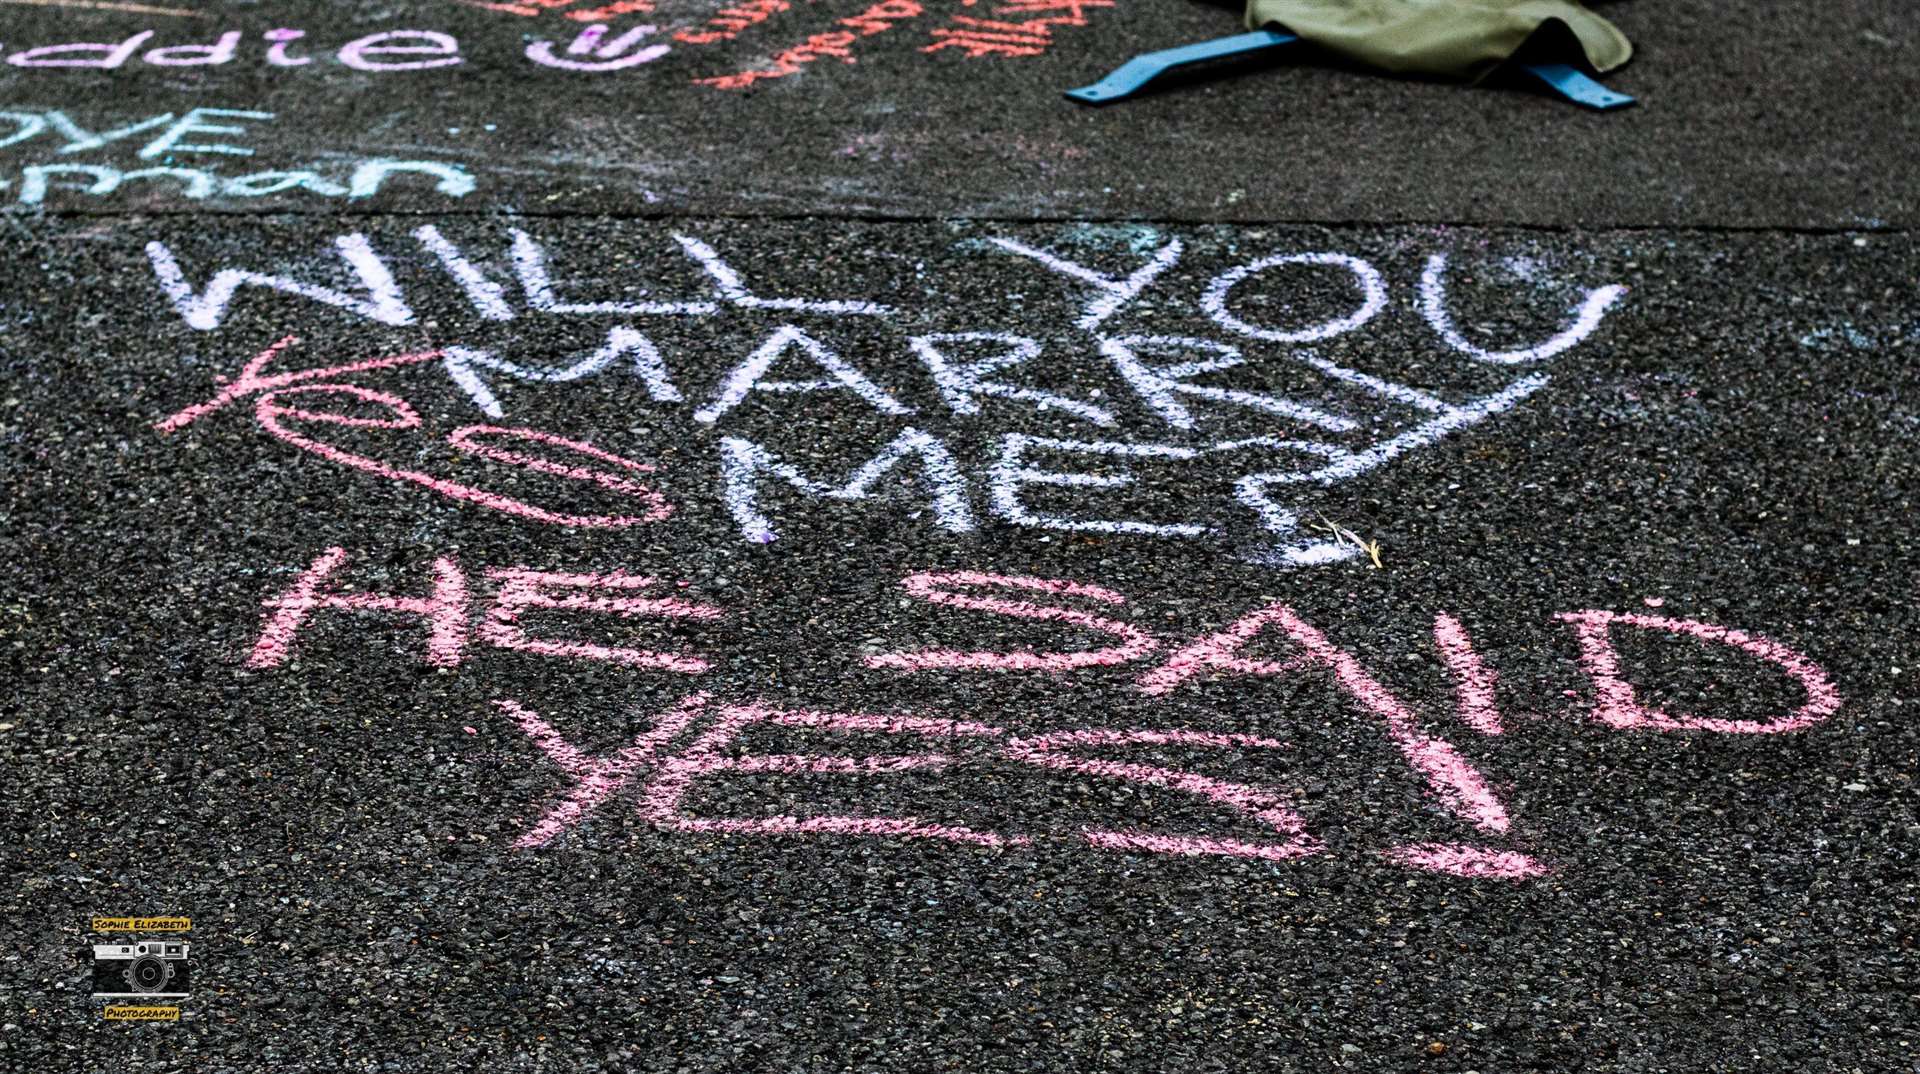 The chalked wedding proposal at this year's festival. Image by Sophie Elizabeth